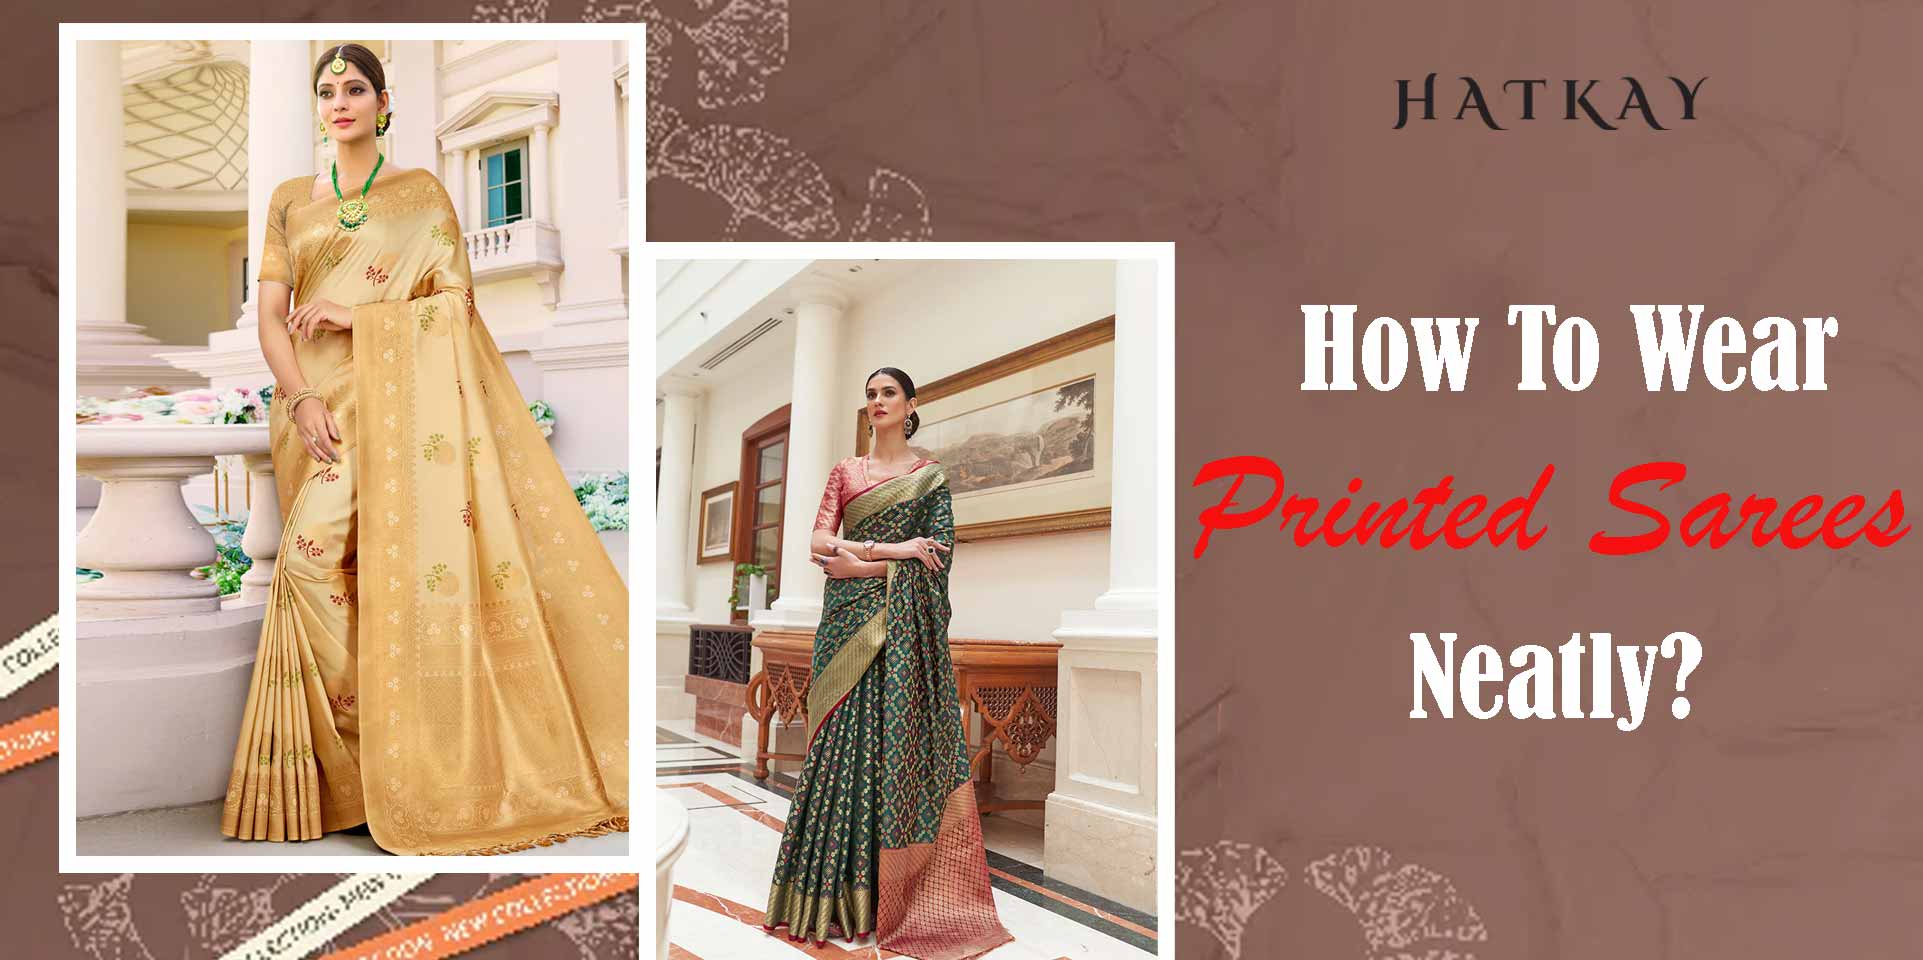 How to Wear Printed Sarees Neatly?